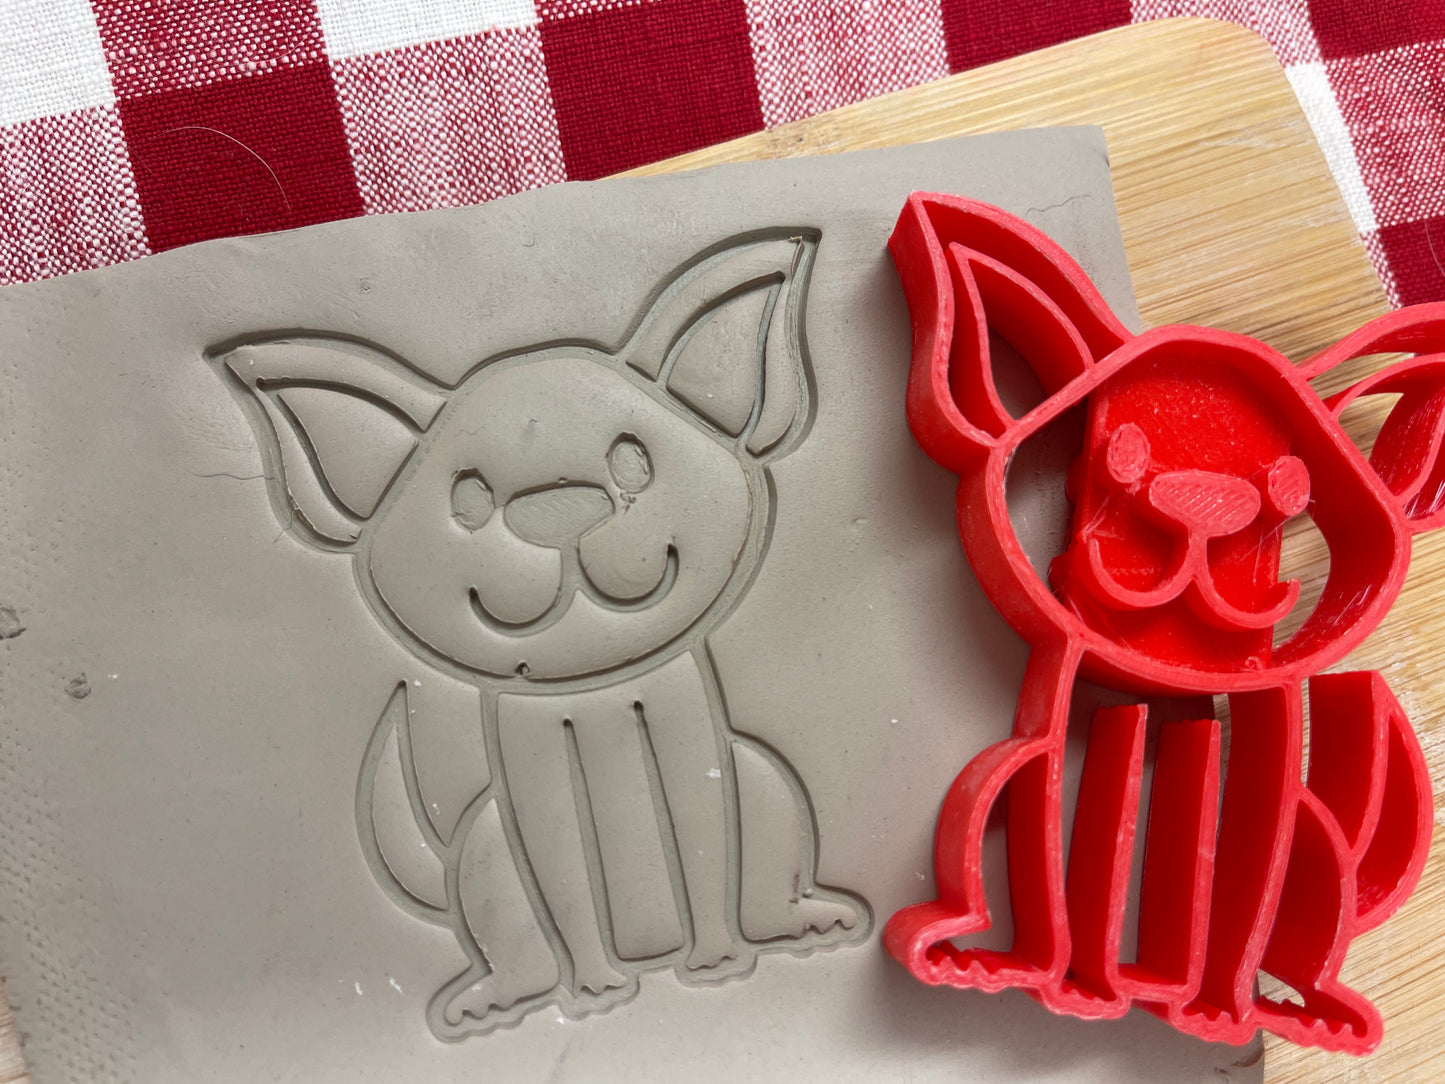 Chihuahua Dog Reversible Pottery Stamp - Pet doodle series, plastic 3D printed, multiple sizes